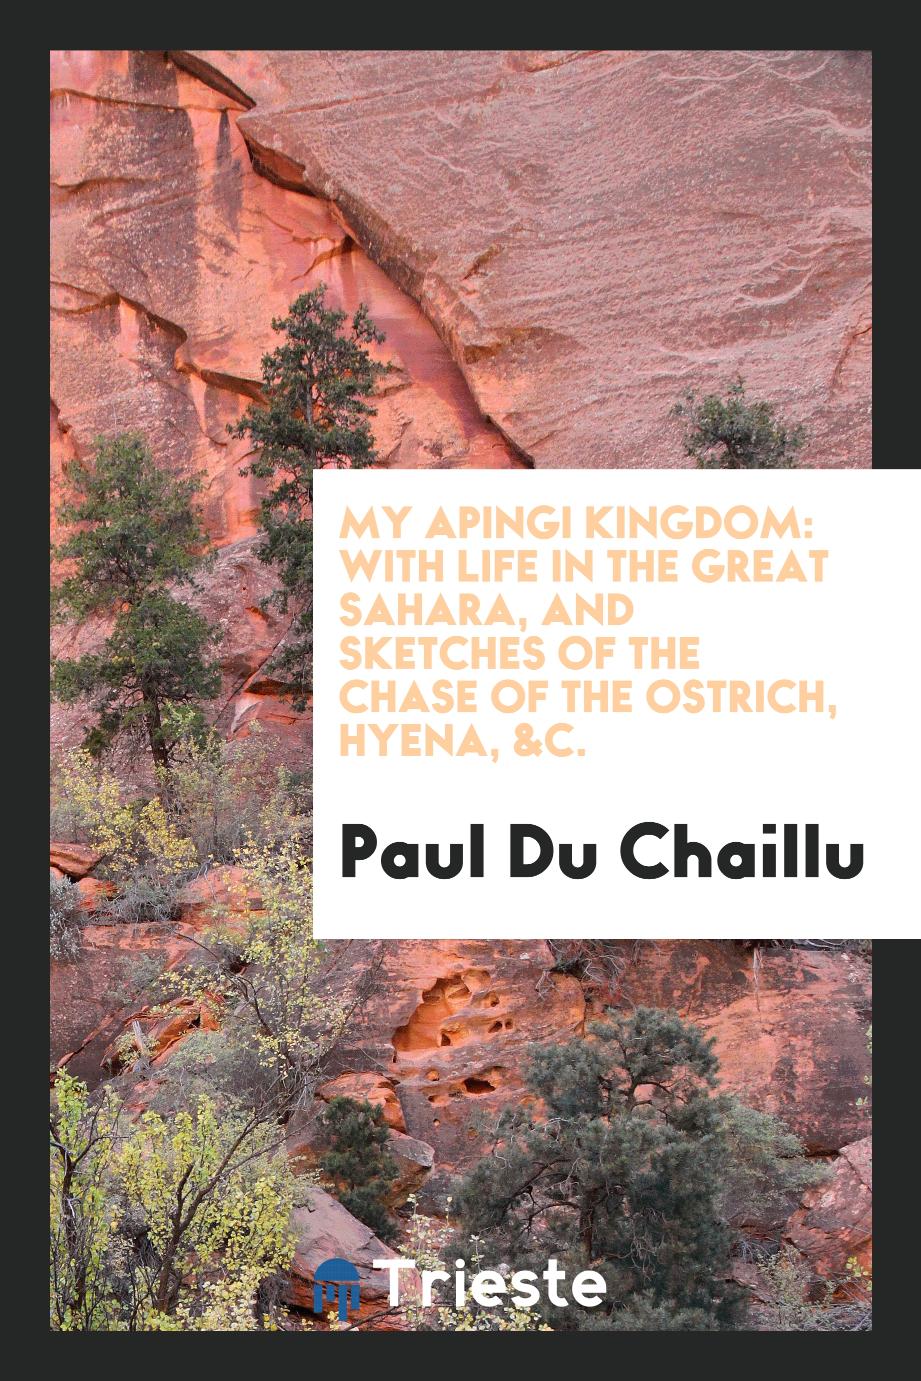 My Apingi Kingdom: With Life in the Great Sahara, and Sketches of the Chase of the Ostrich, Hyena, &C.